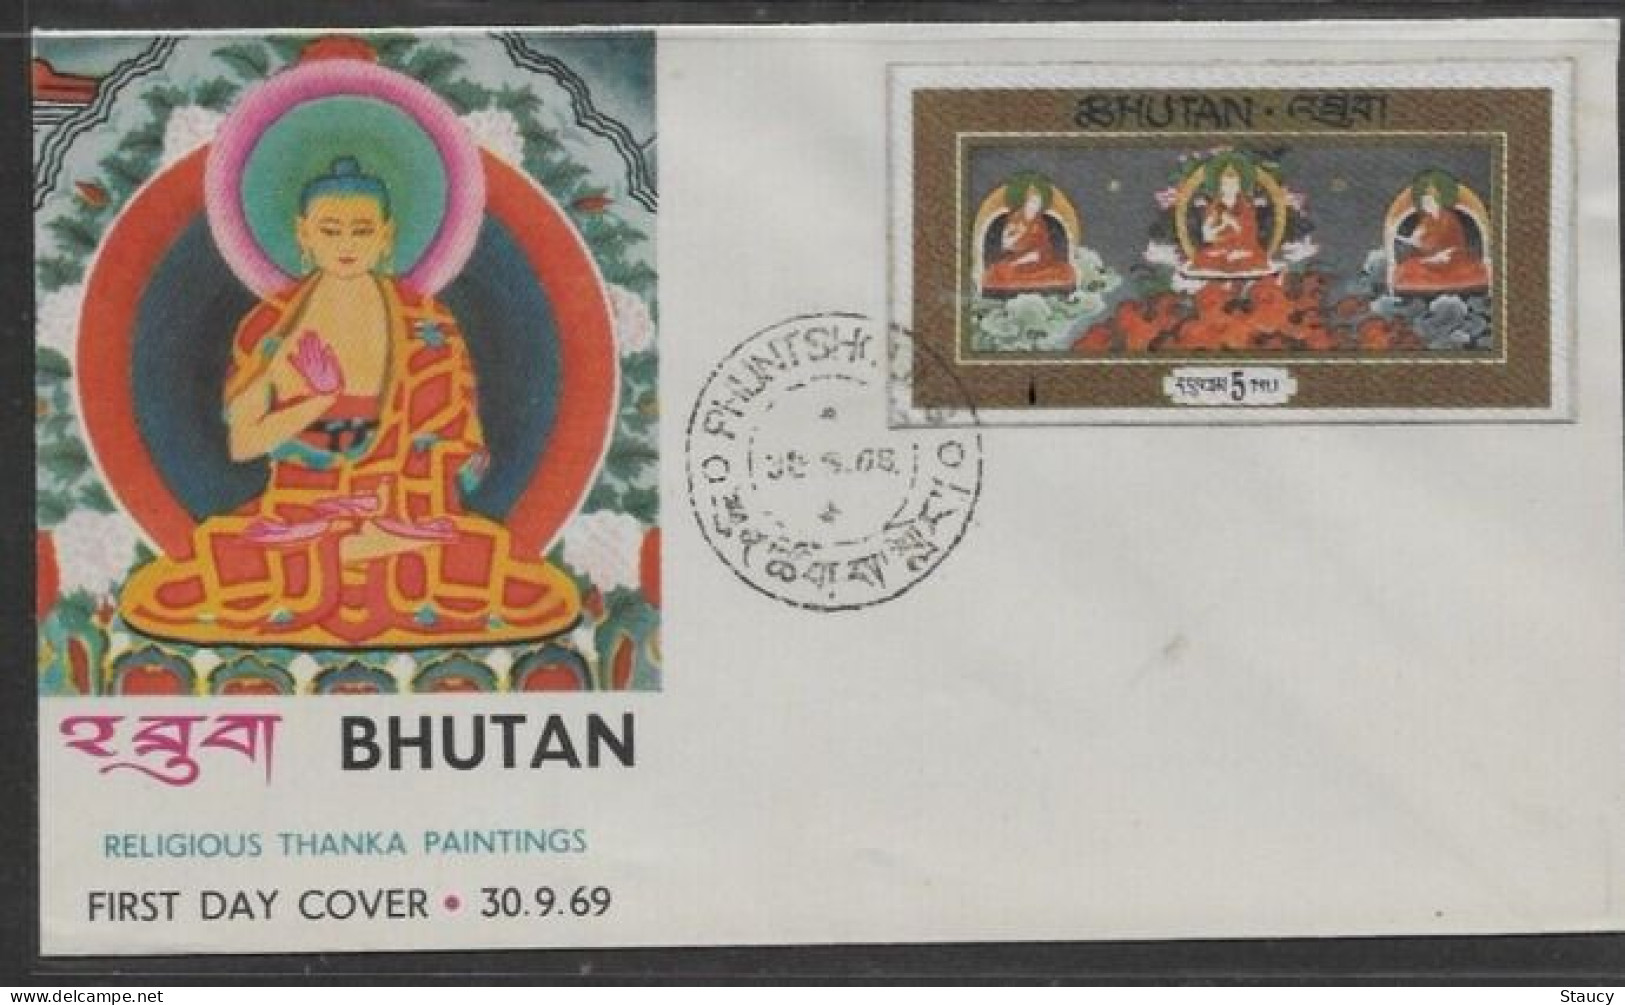 BHUTAN 1969 RELIGIOUS THANKA PAINTINGS BUDHA - SILK CLOTH Unique Stamp Imperf 1v Official FDC As Per Scan - Bhután